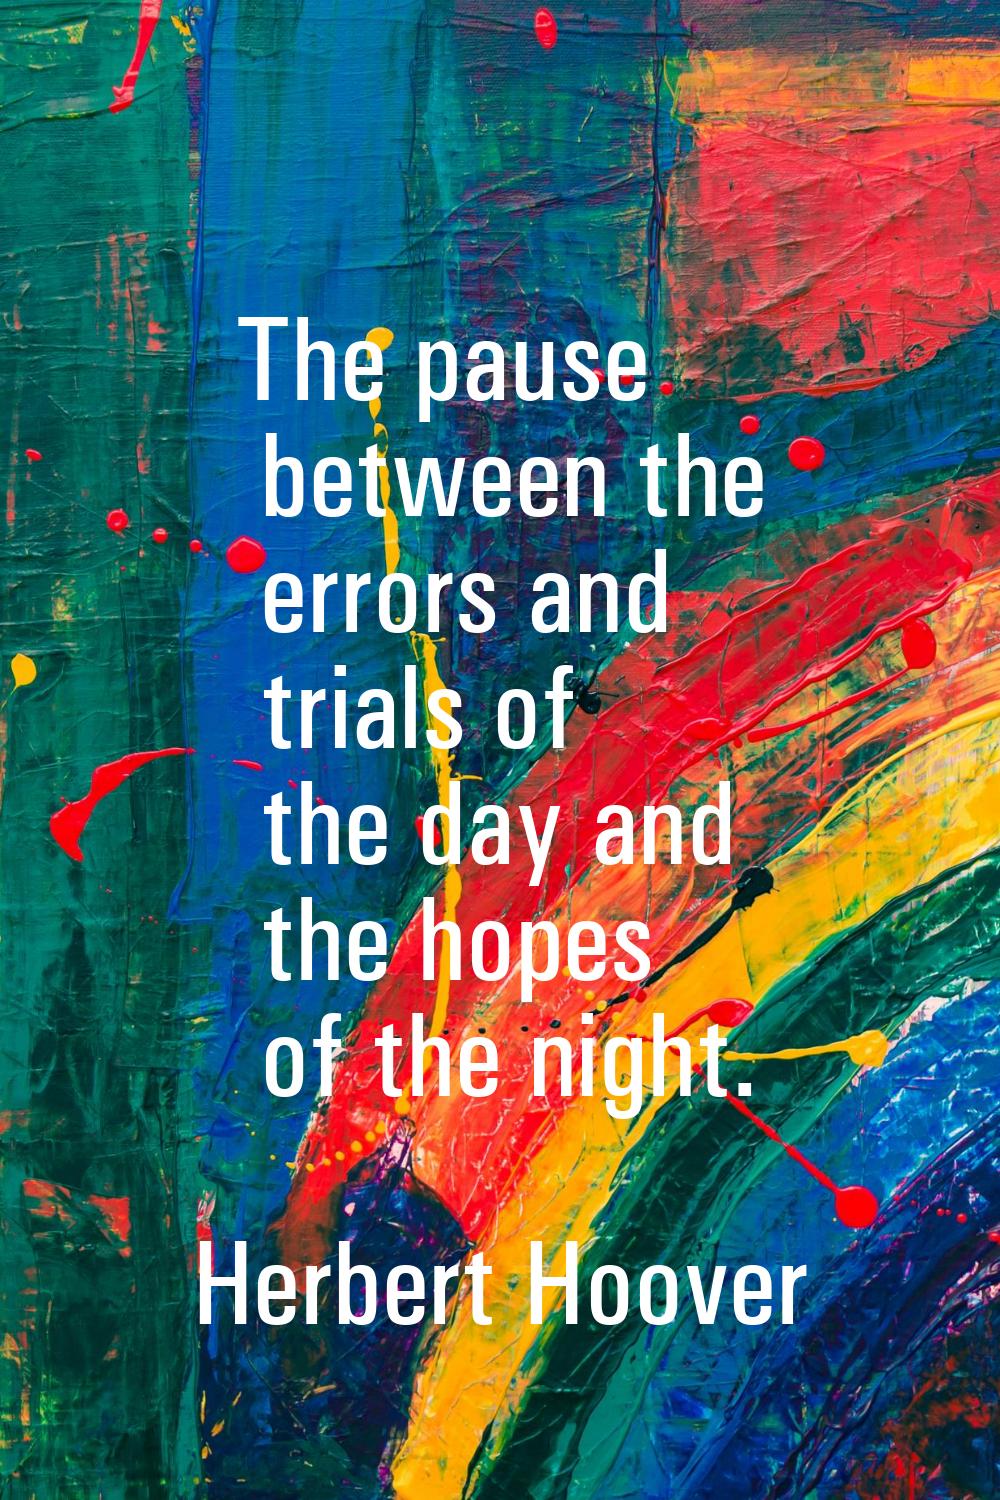 The pause between the errors and trials of the day and the hopes of the night.